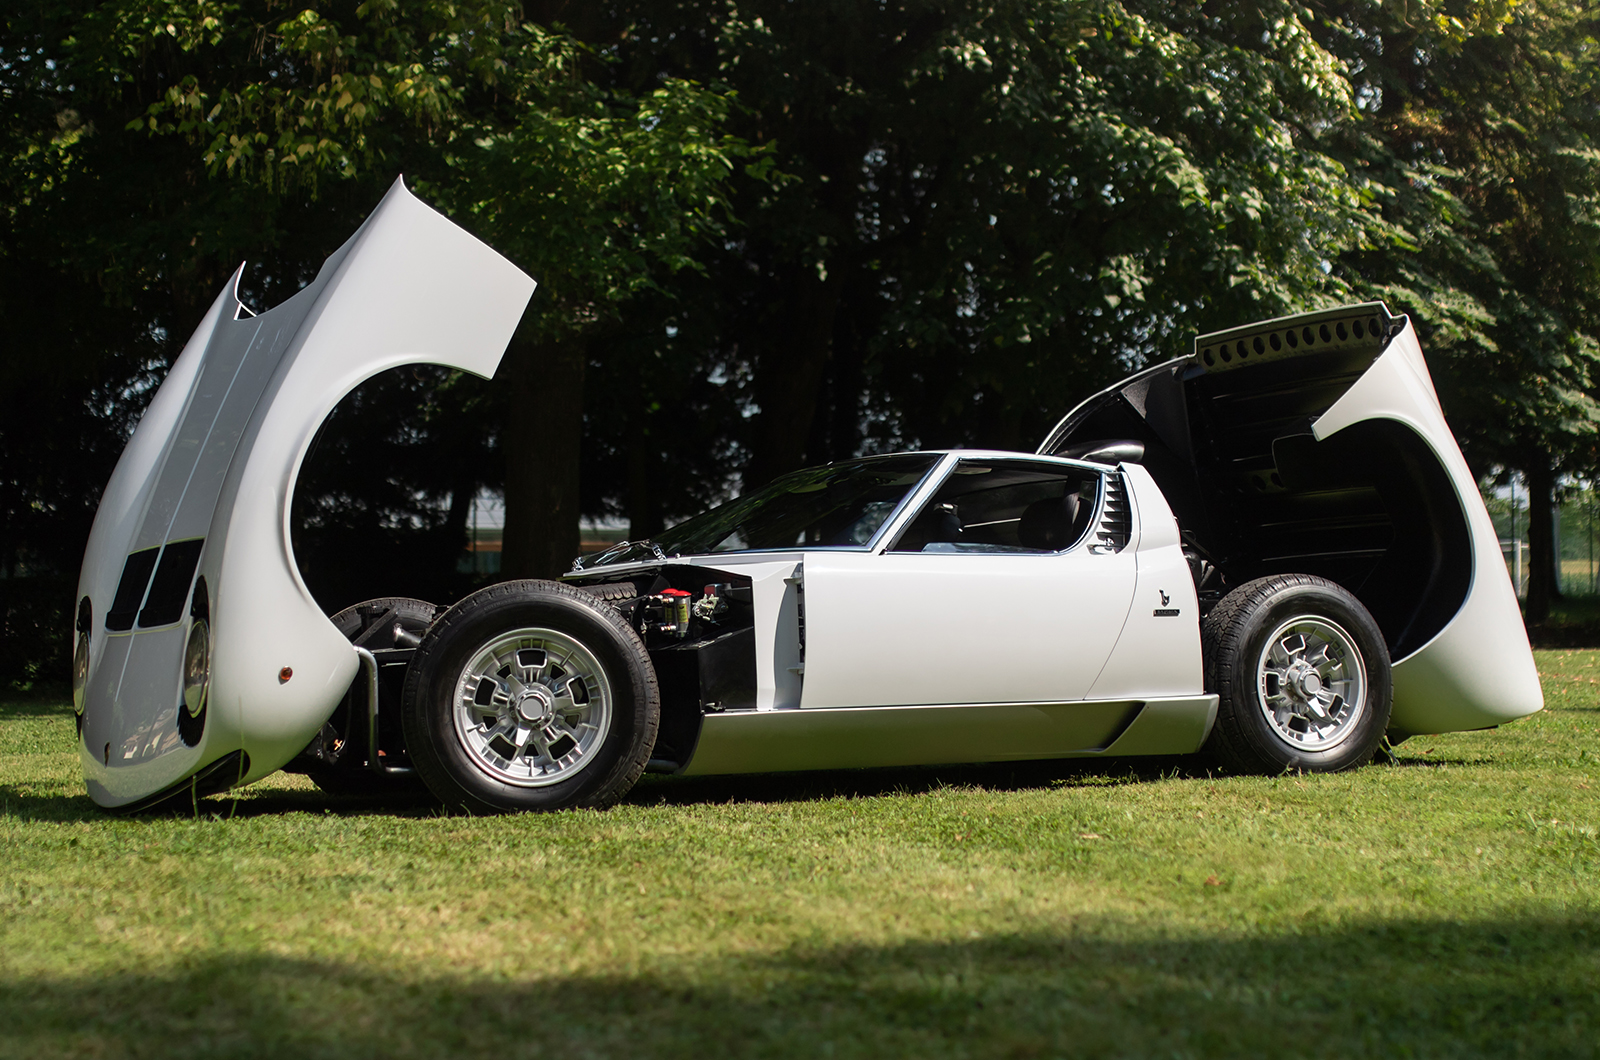 Classic & Sports Car – Rod Stewart's Miura is coming up for sale